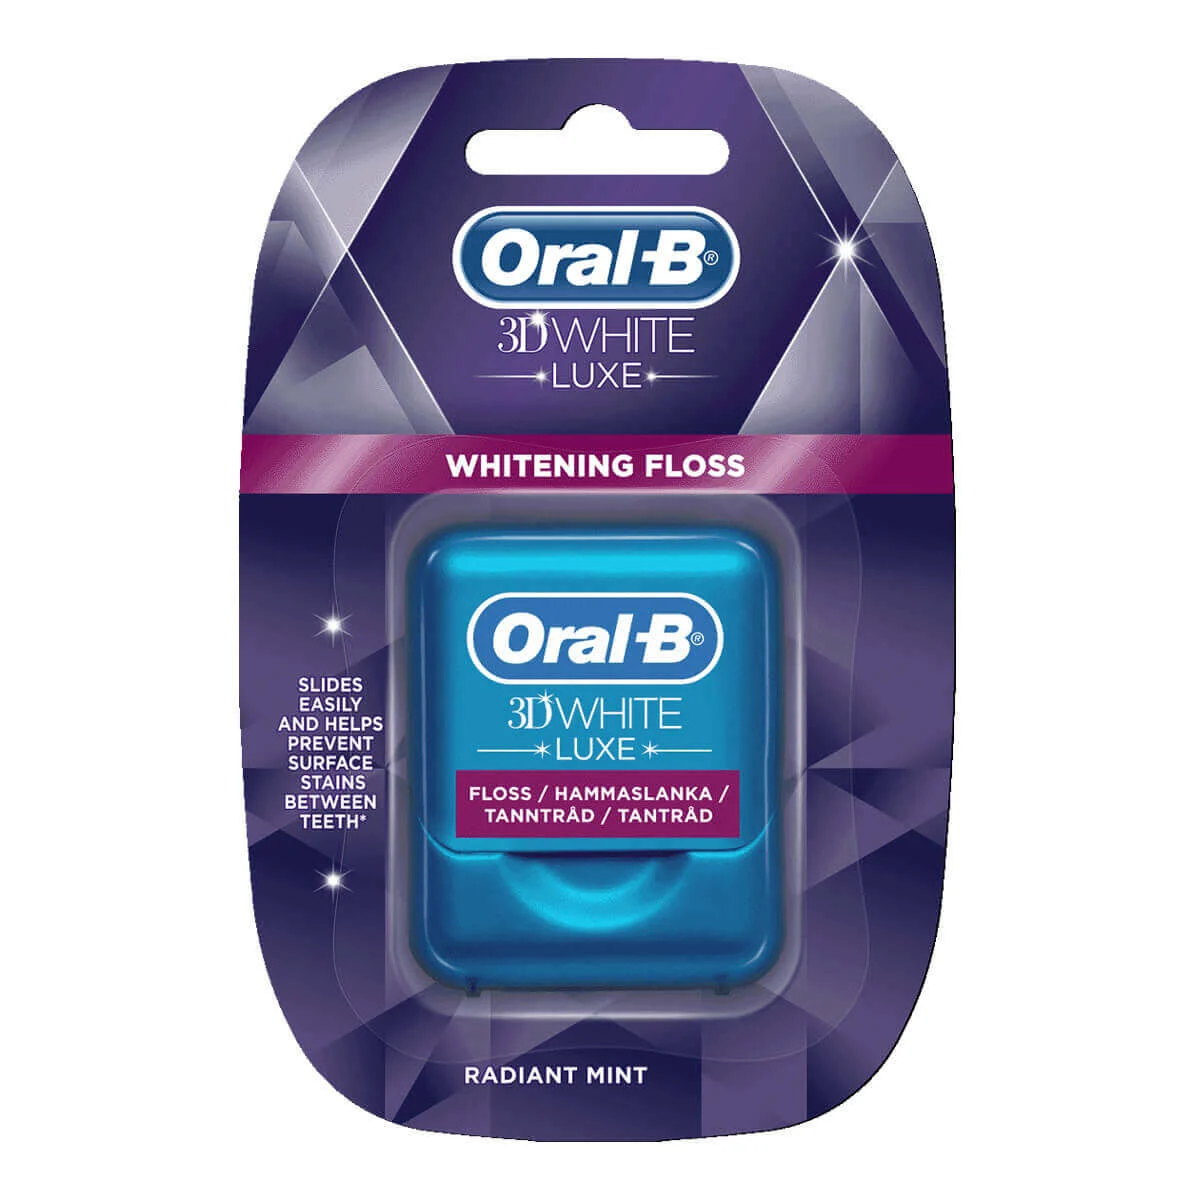 Oral-B 3D White Luxe Whitening tandtråd undefined